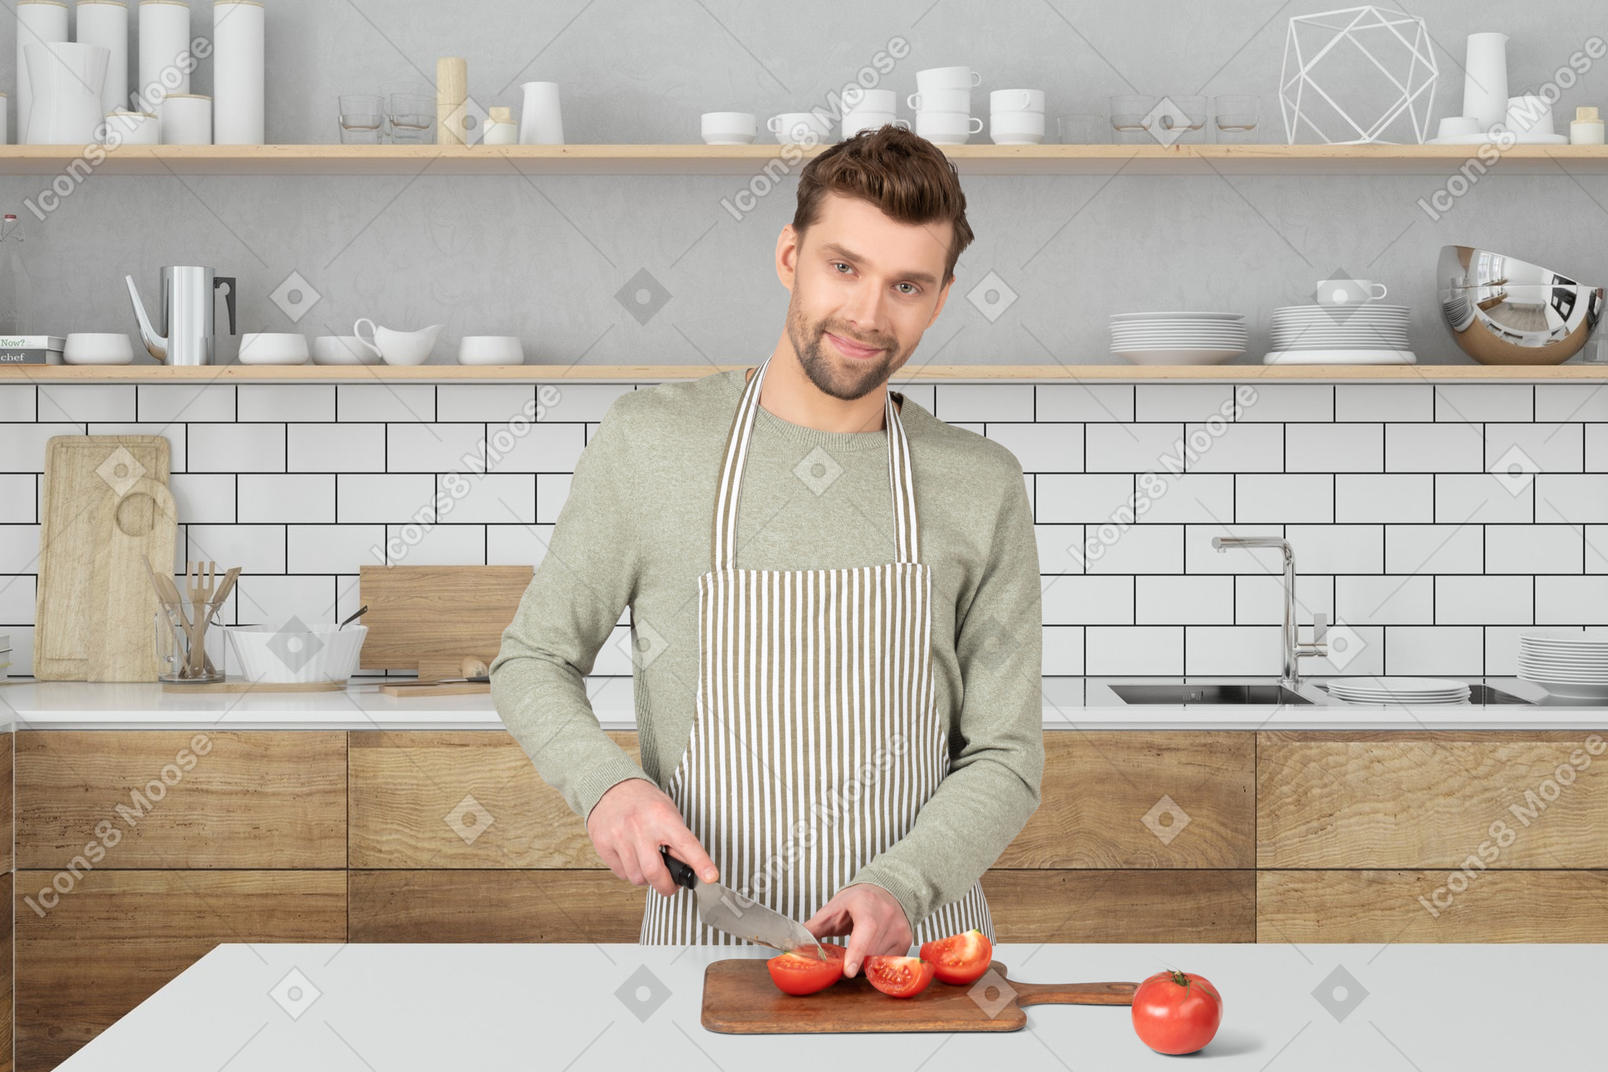 Young man preparing food in the kitchen